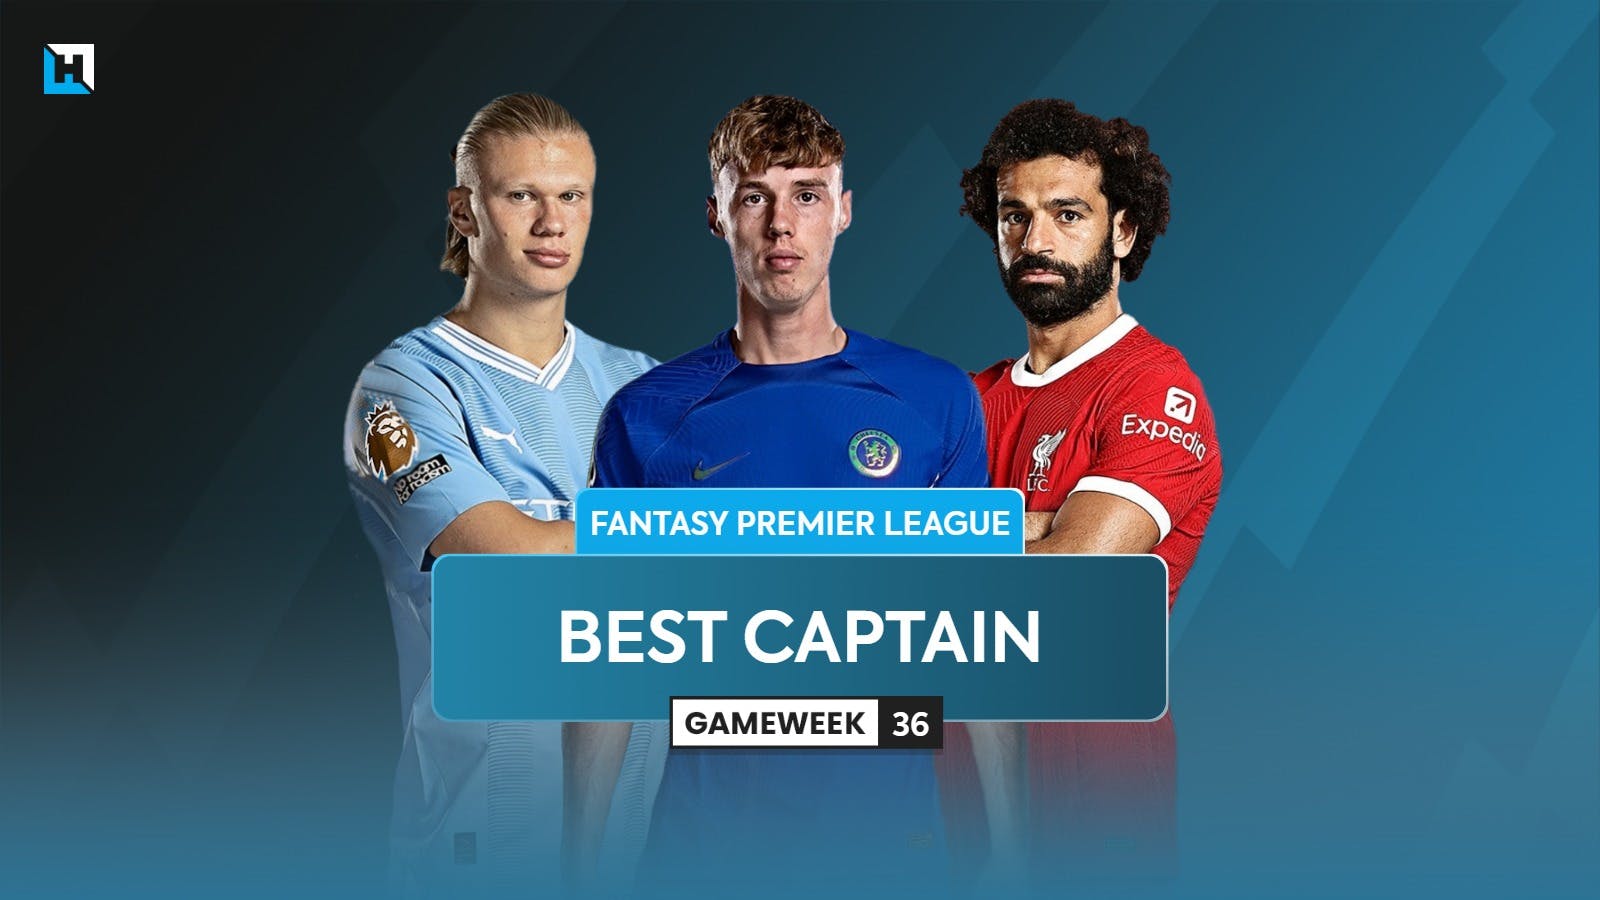 Who is the best FPL captain for Gameweek 36?